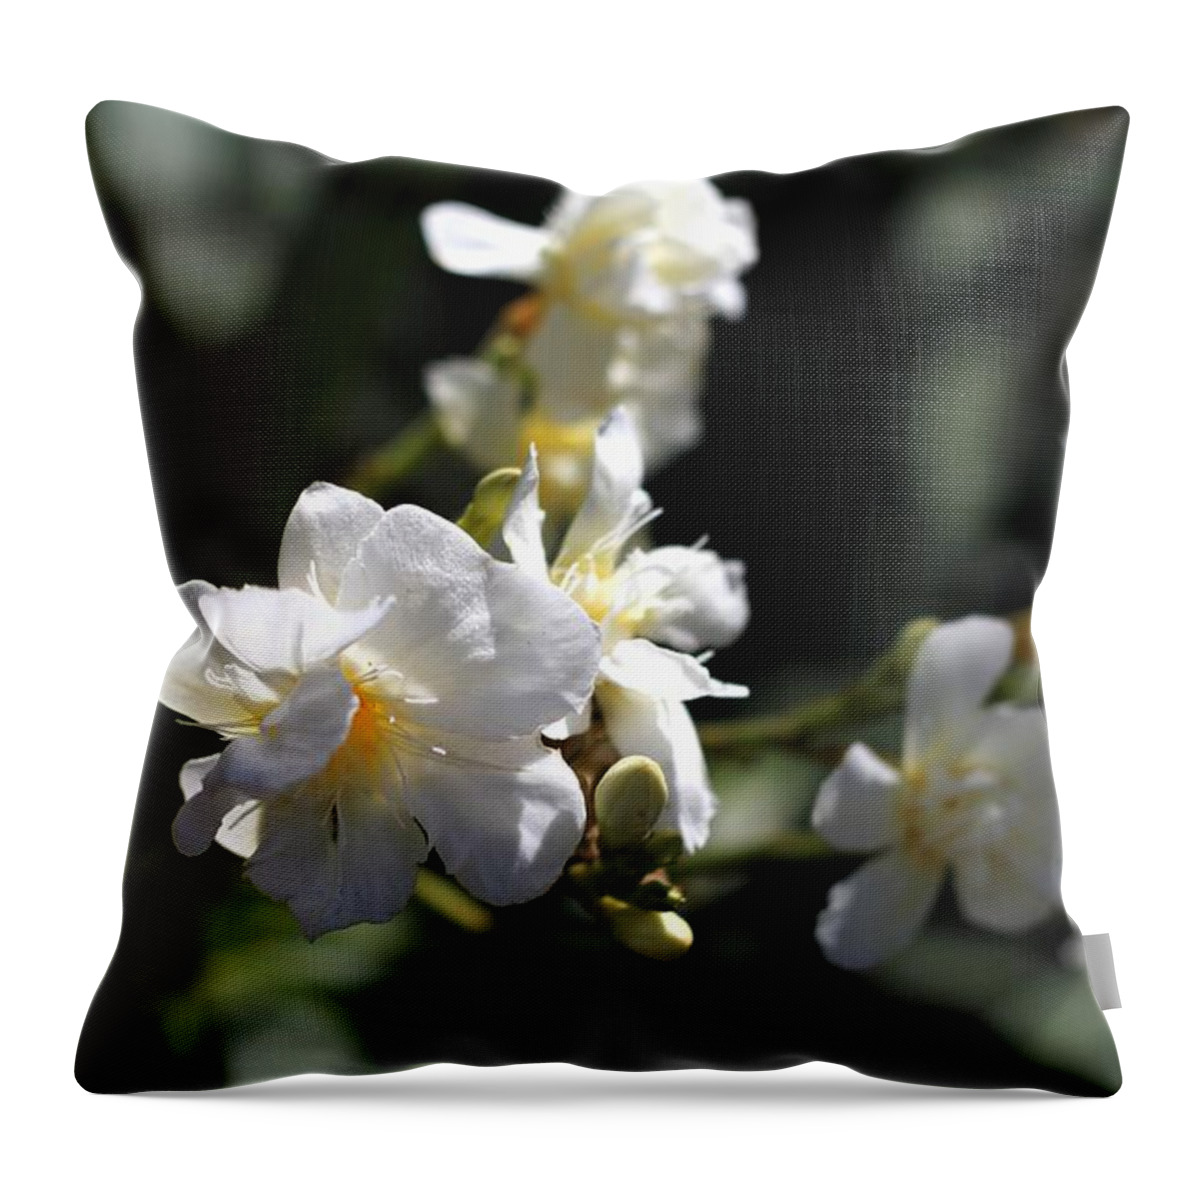 White Flower Throw Pillow featuring the photograph White Flower - Early Spring Time by Ramabhadran Thirupattur